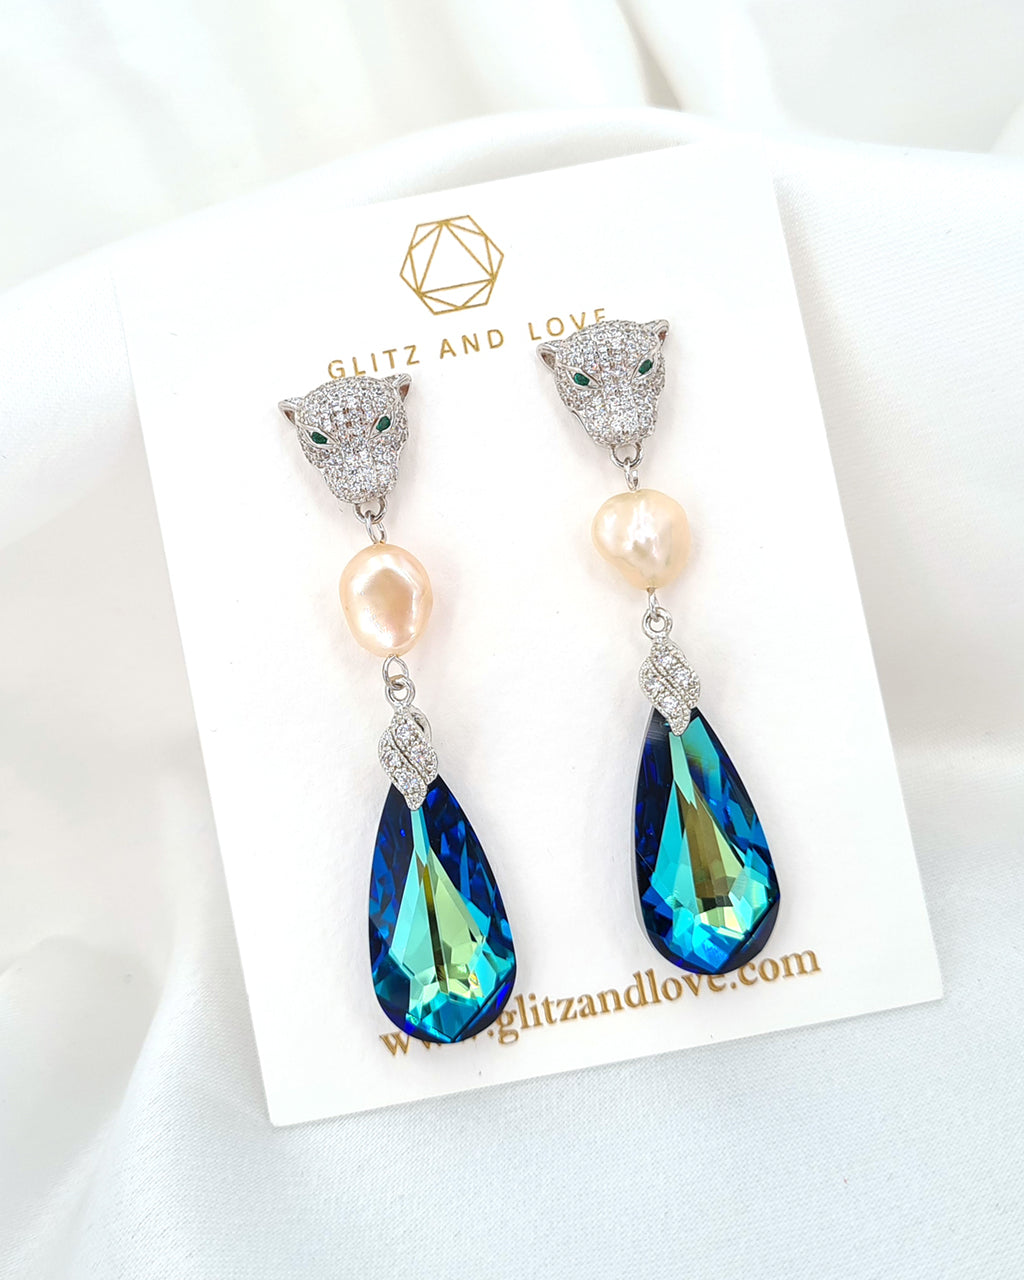 Green Eyed Panther Silver Earrings - Baroque Keshi Pearls & Bermuda Blue Crystals - Wedding Bridal Jewelry for Brides and Bridesmaids | Singapore